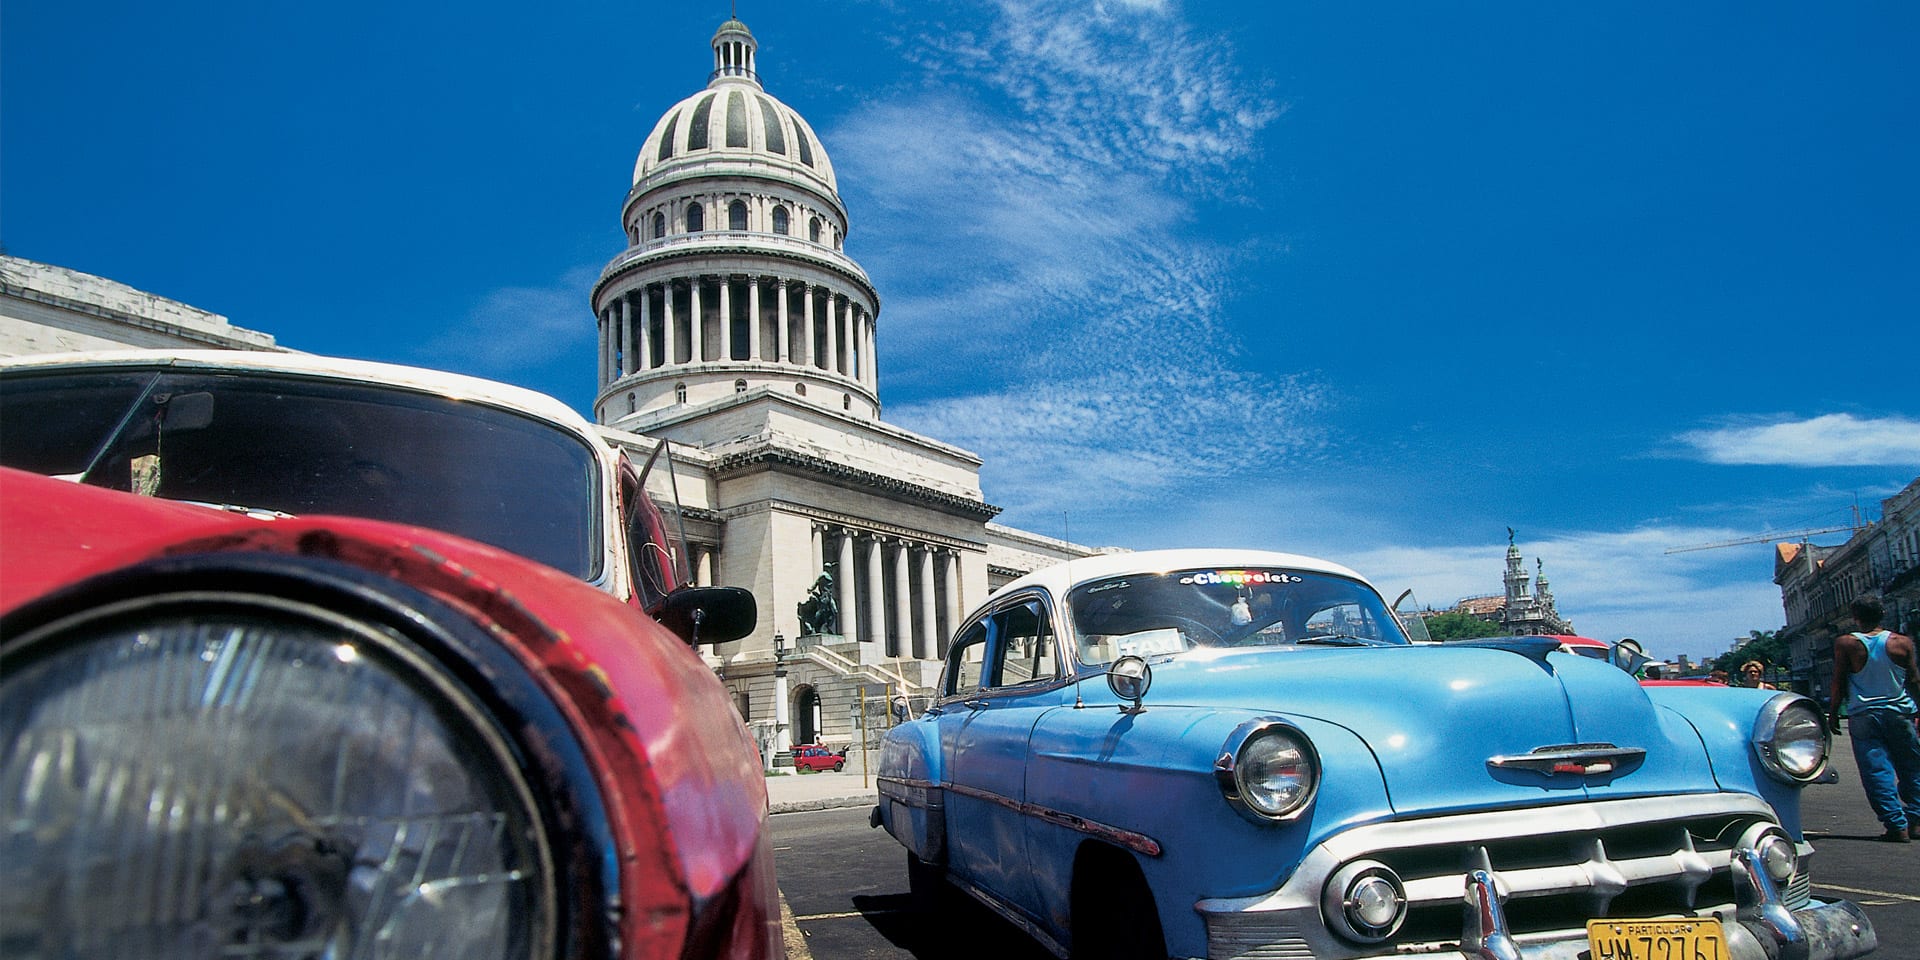 trip to cuba from mexico